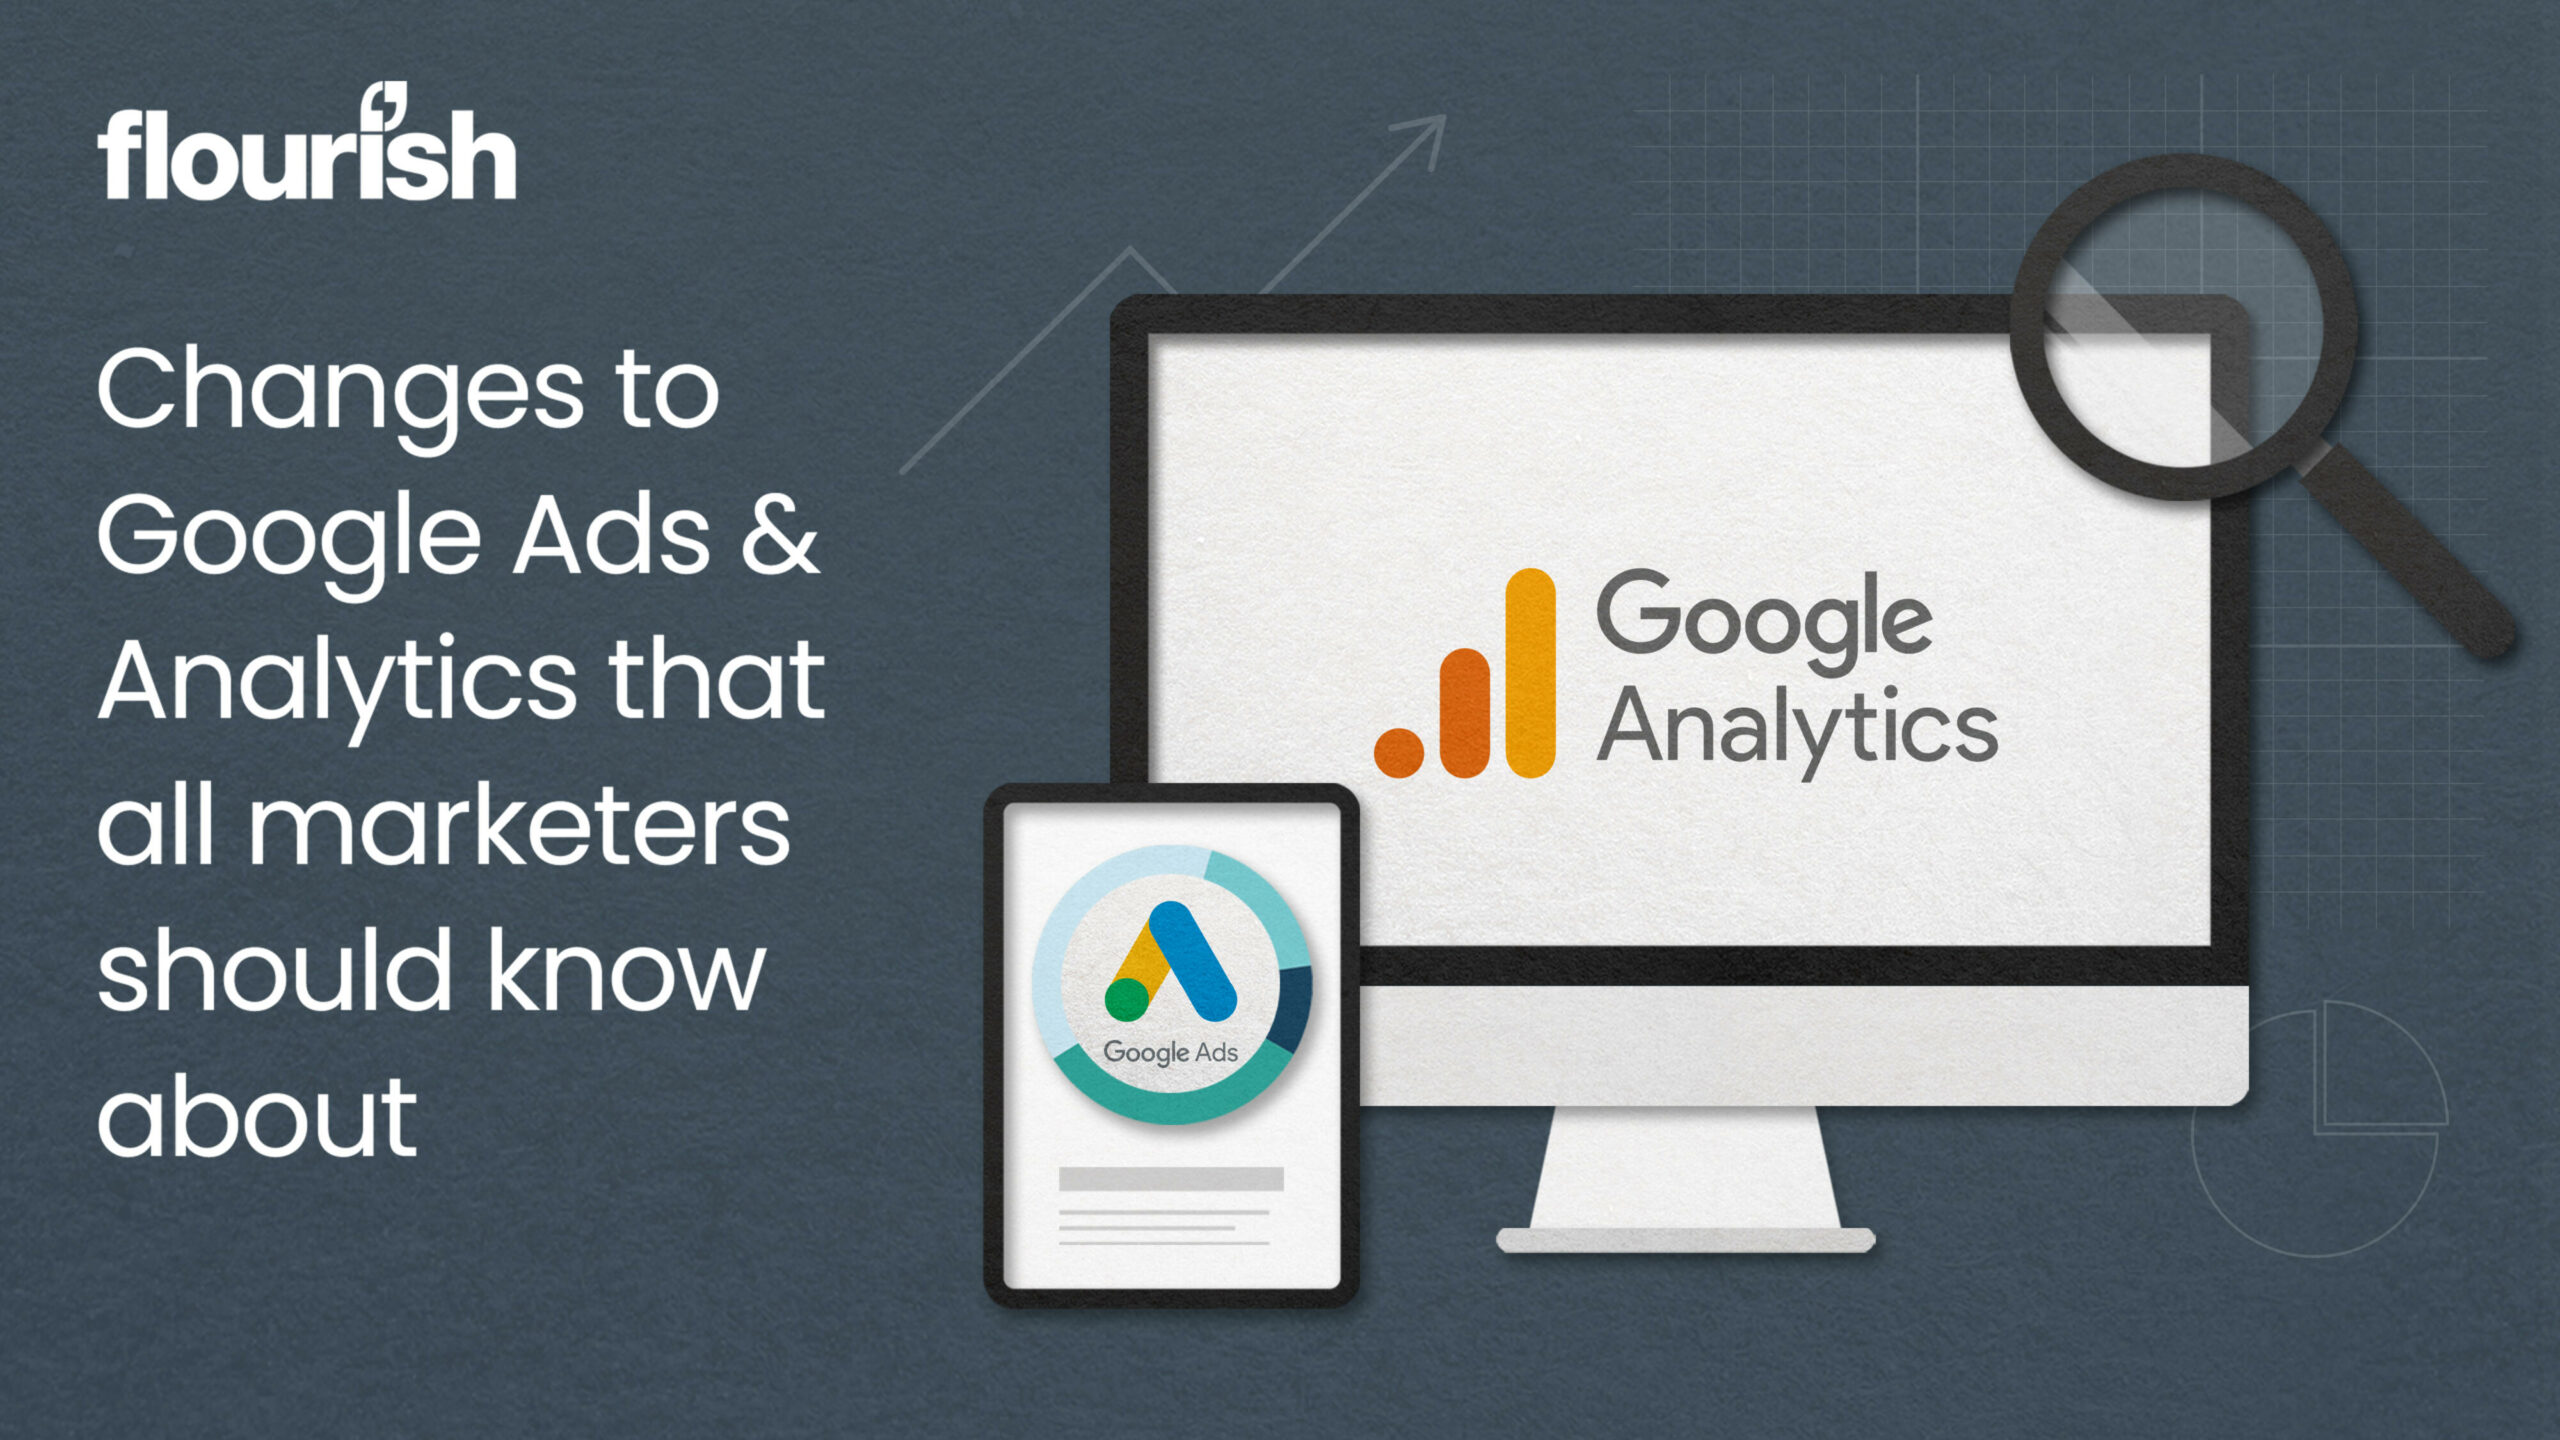 Changes to Google Ads & Analytics that all marketers should know about